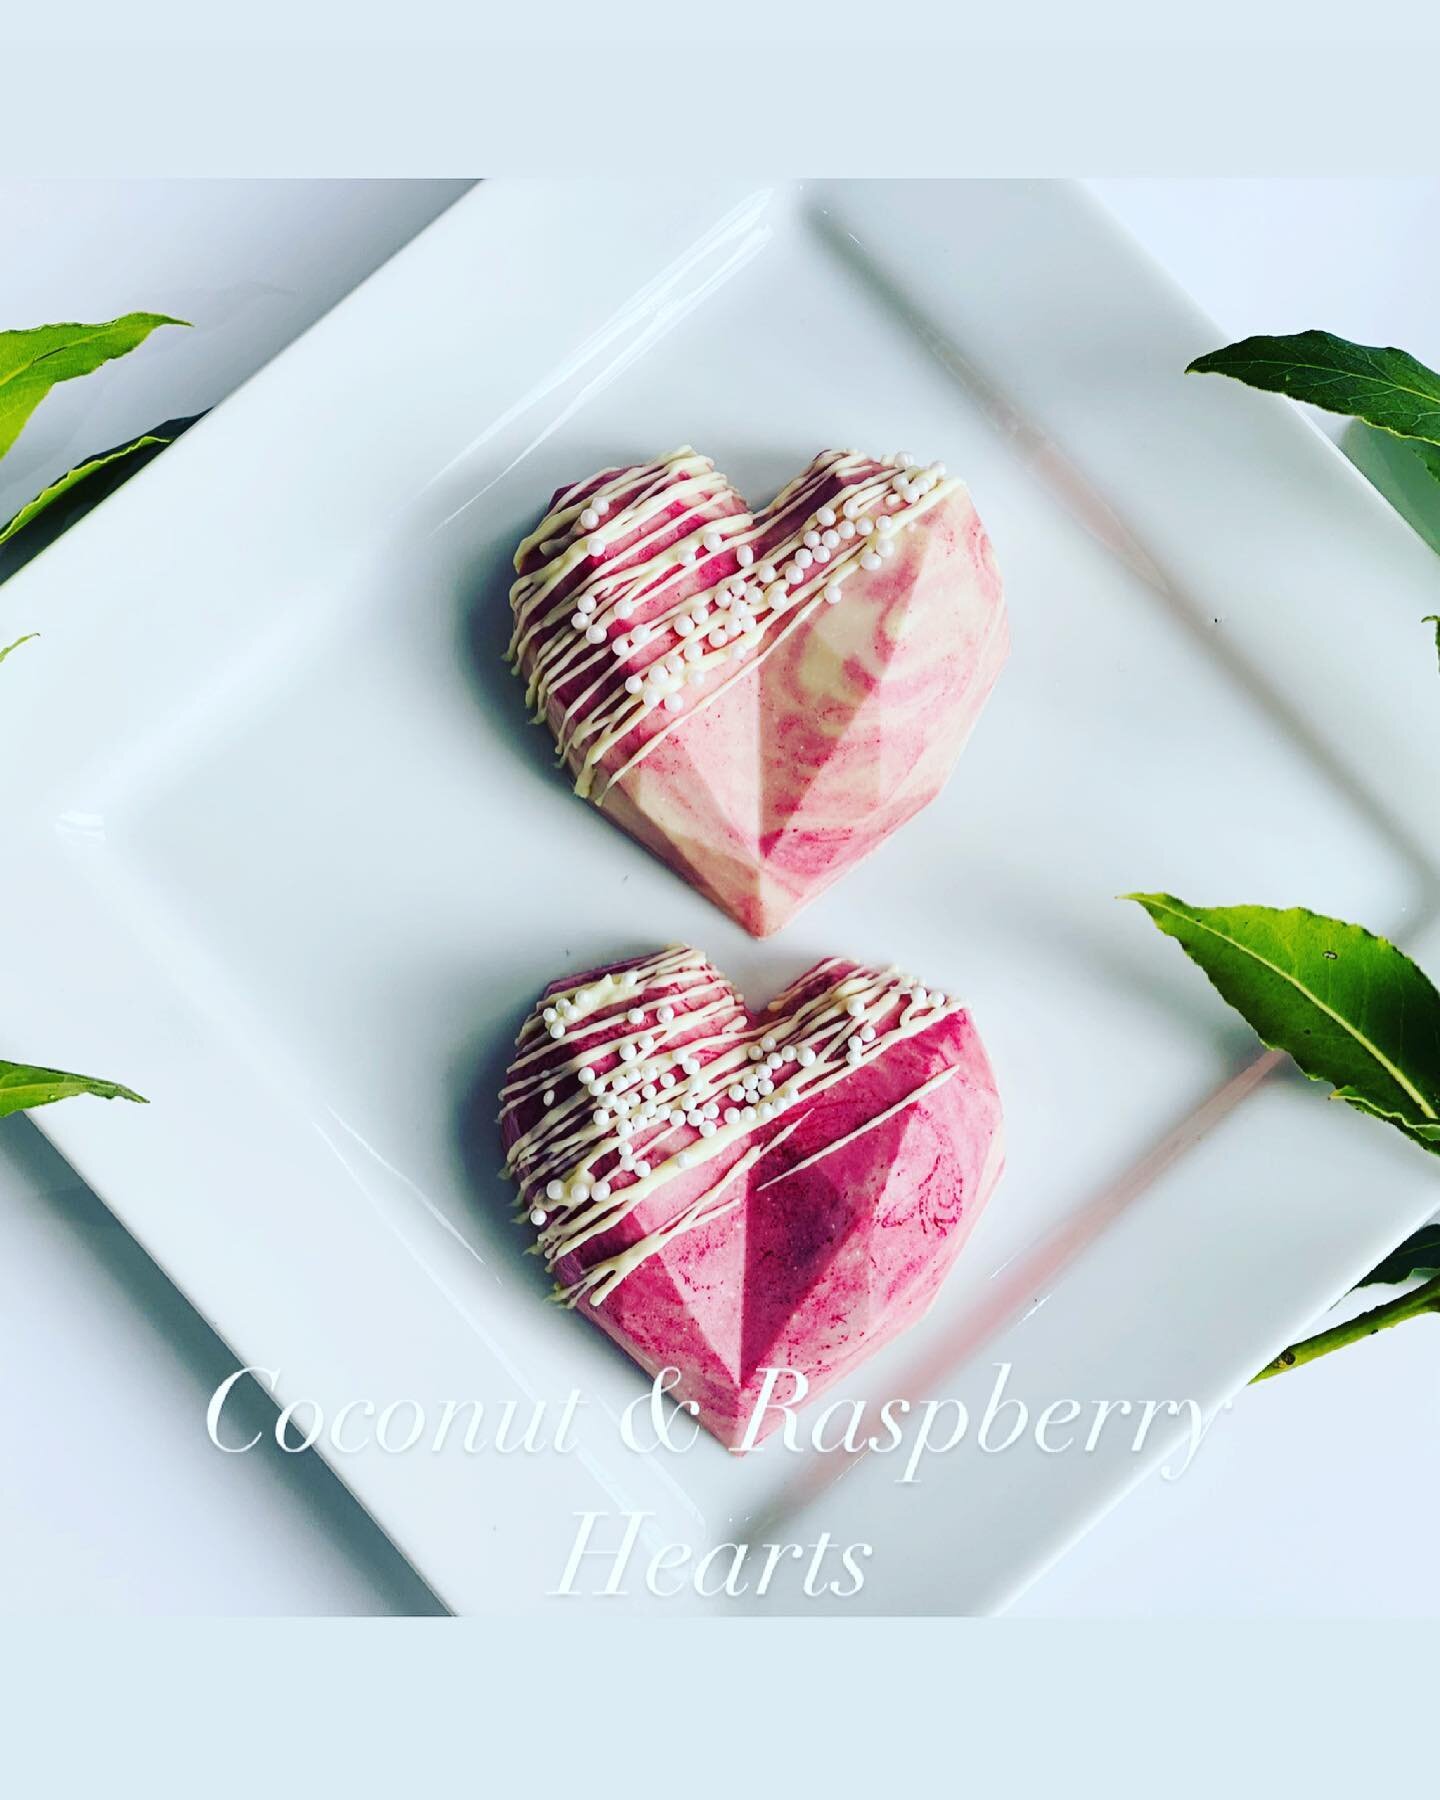 Made some lovely little sweat treats today, with some spare coconut cake I had! 

They would make lovely Wedding favours wouldn&rsquo;t they?

Raspberry &amp; Coconut wrapped in marbled white chocolate.

#weddingguest #weddingfavours #sweet #sweettre